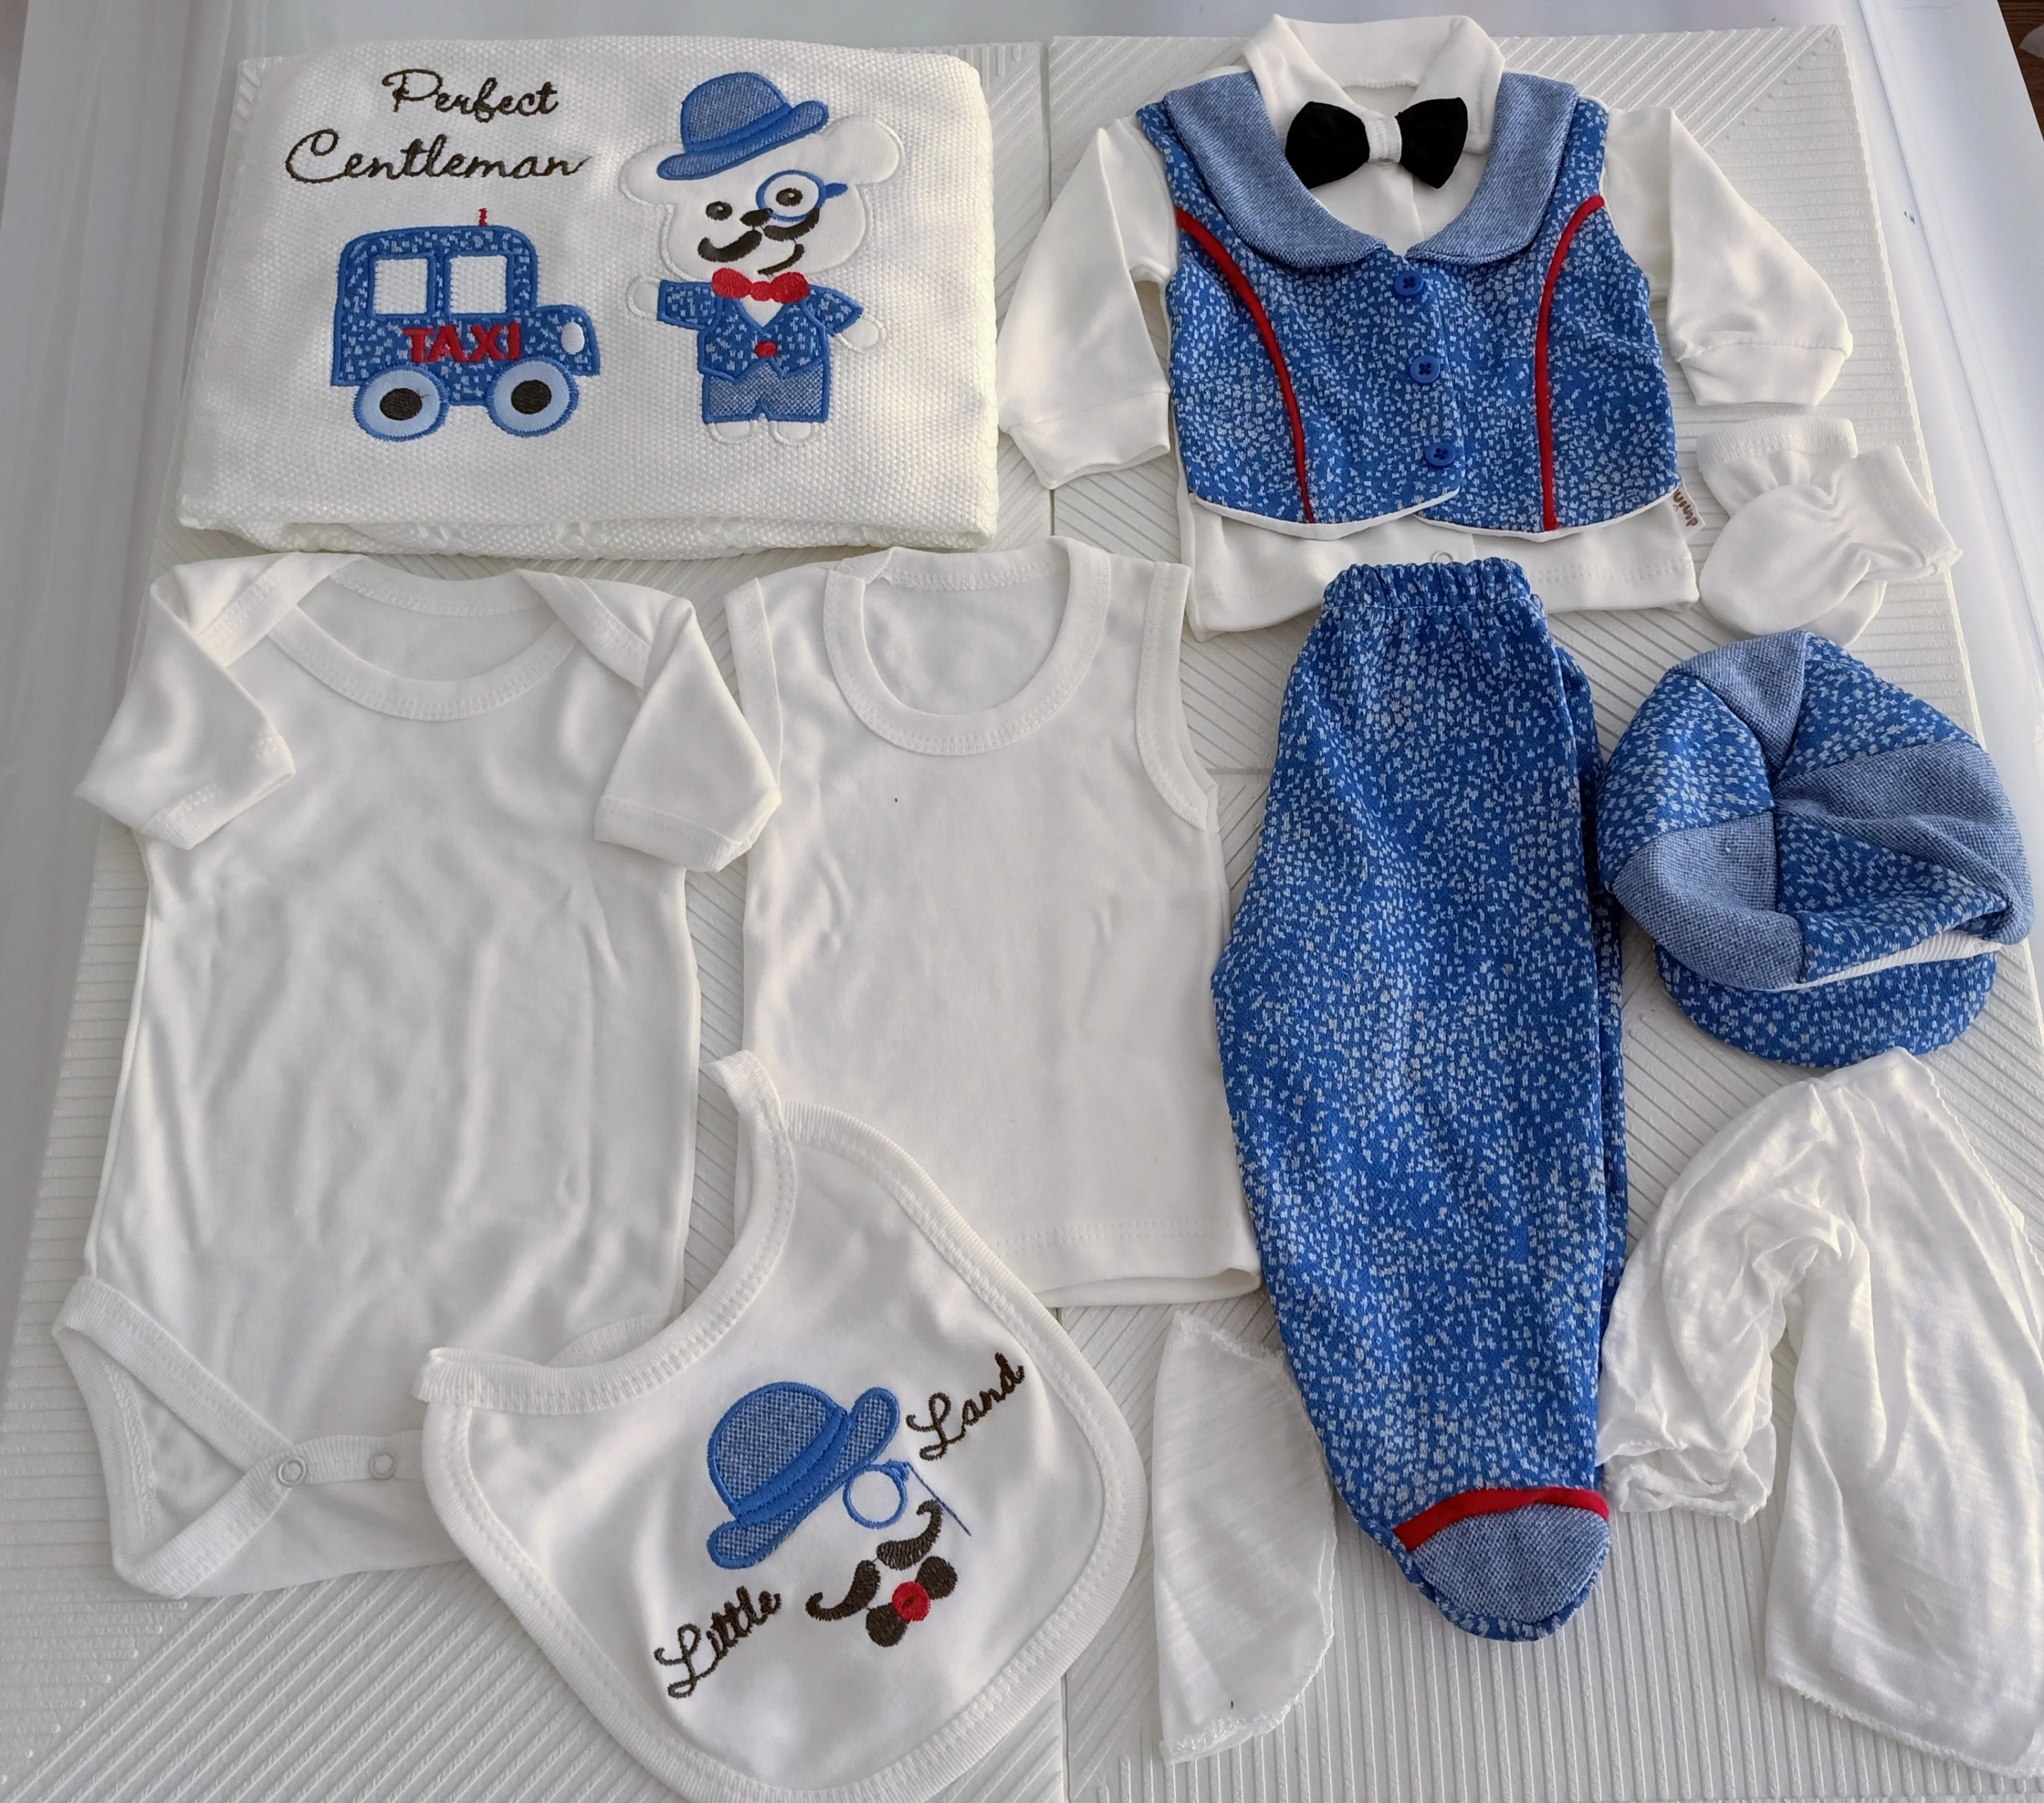 Baby Boy Hospital Set Bear and Car Embroidered Newborn Baby Clothing Set 10 pieces Cotton 2022 Winter fashion